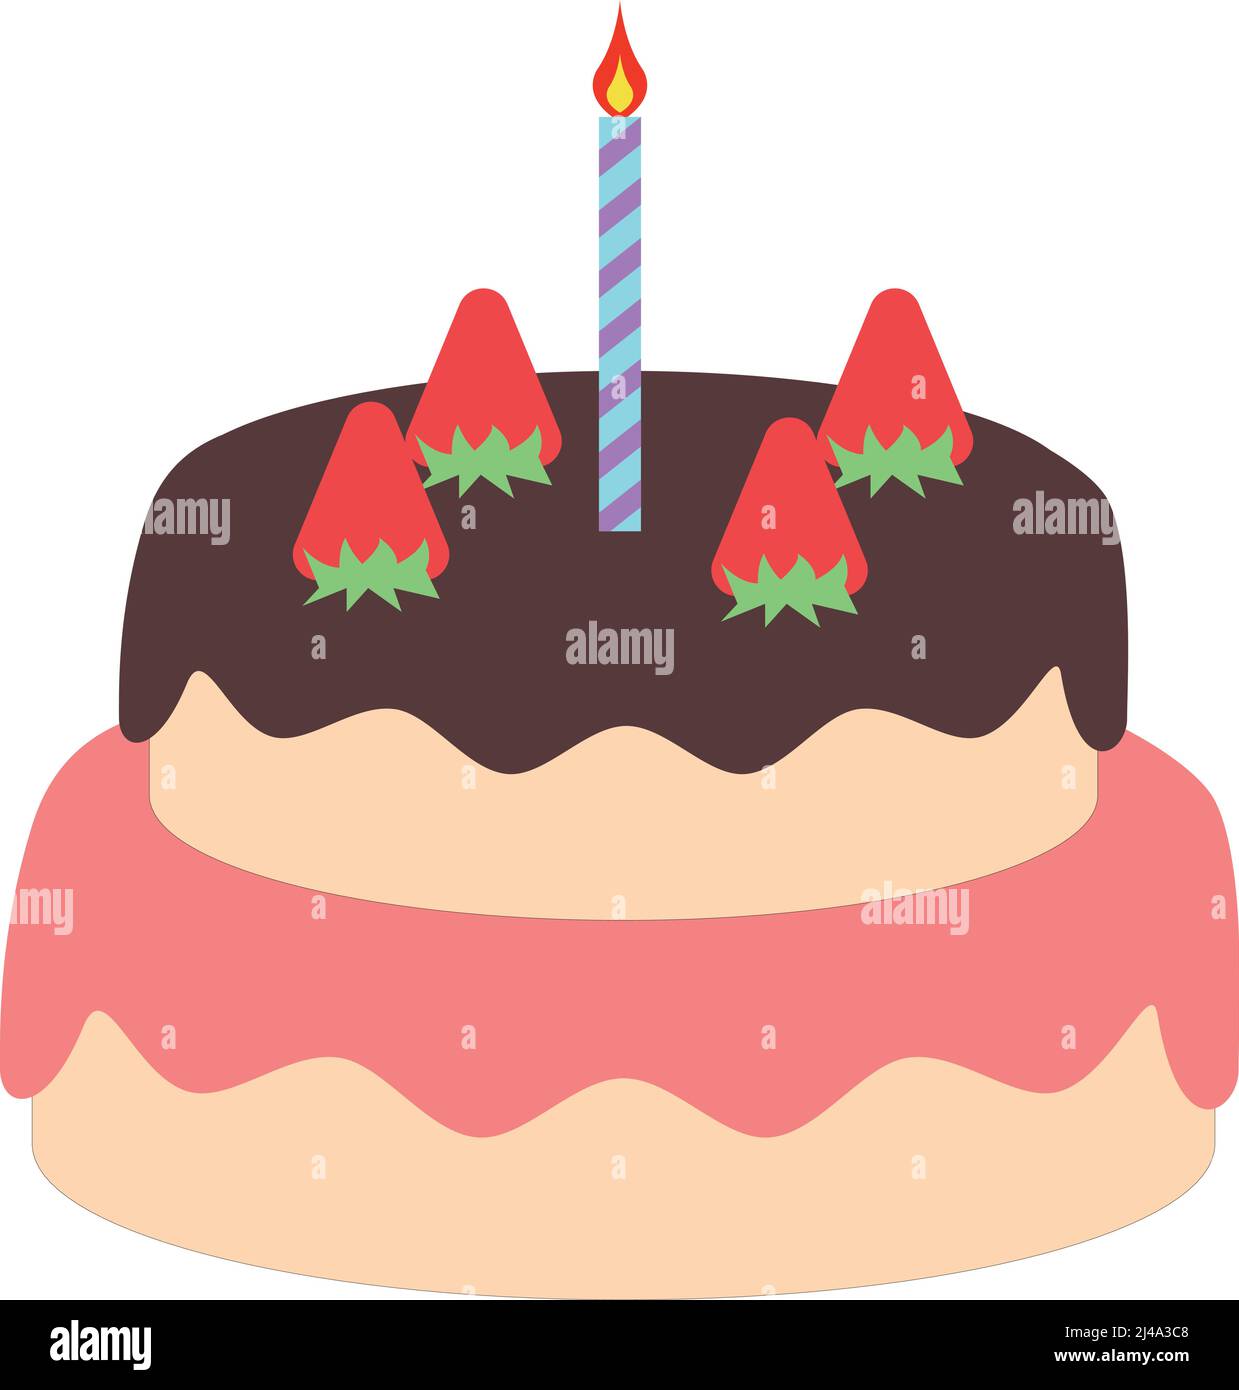 A delicious strawberry cake that you eat on the same anniversary as your birthday vector image illustration Stock Vector